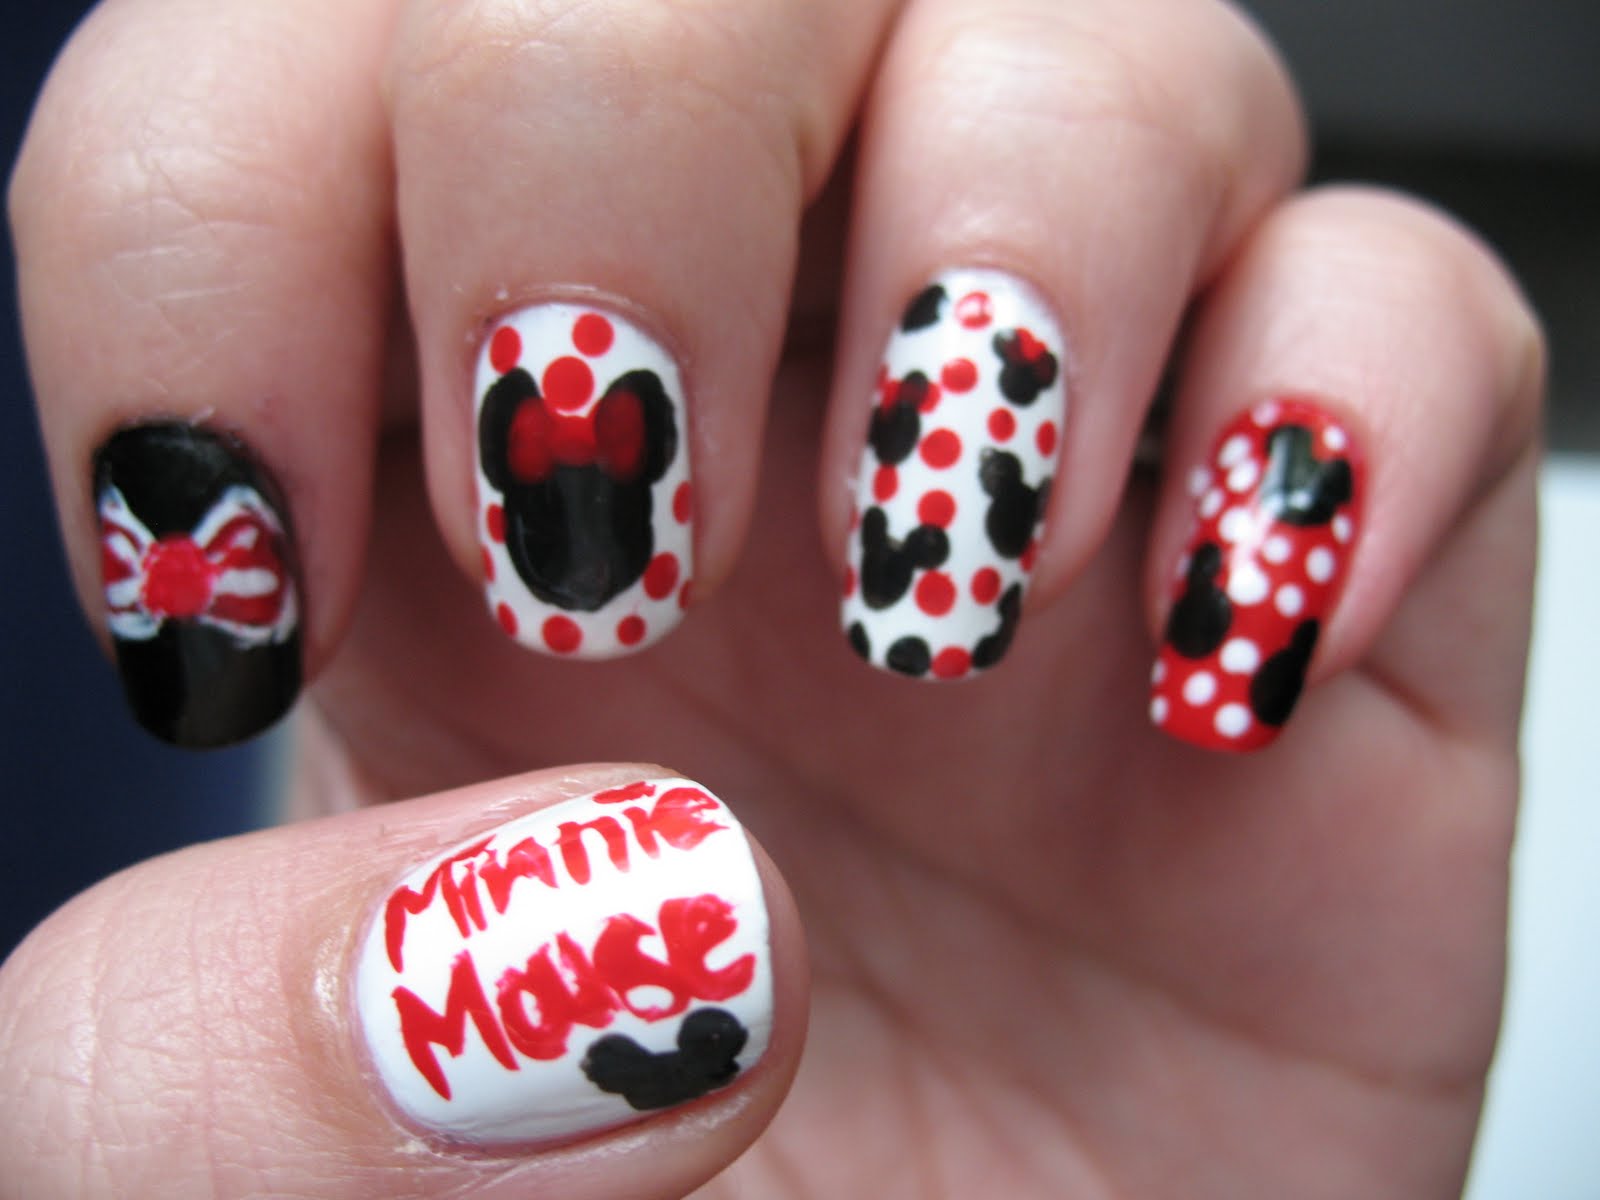 3. Cute Minnie Mouse Gel Nails - wide 3